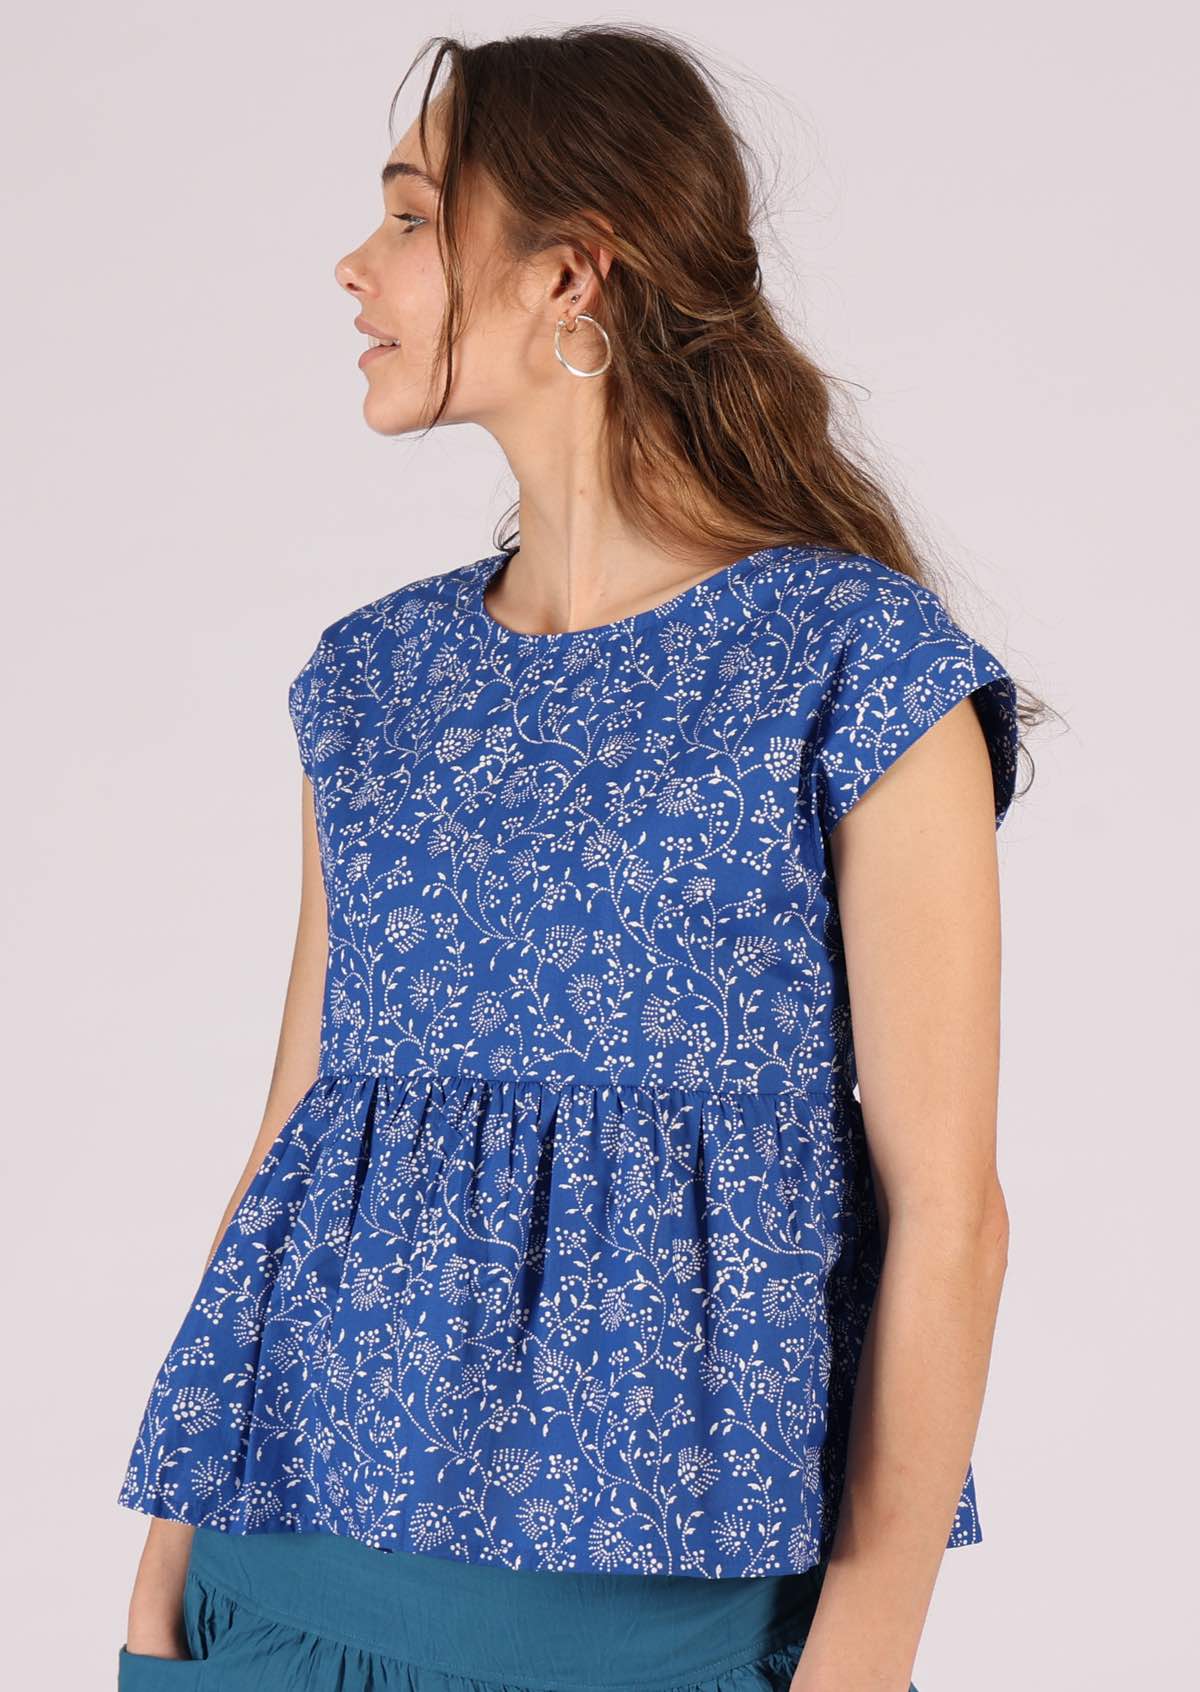 Cap sleeved cotton top with delicate white floral on blue